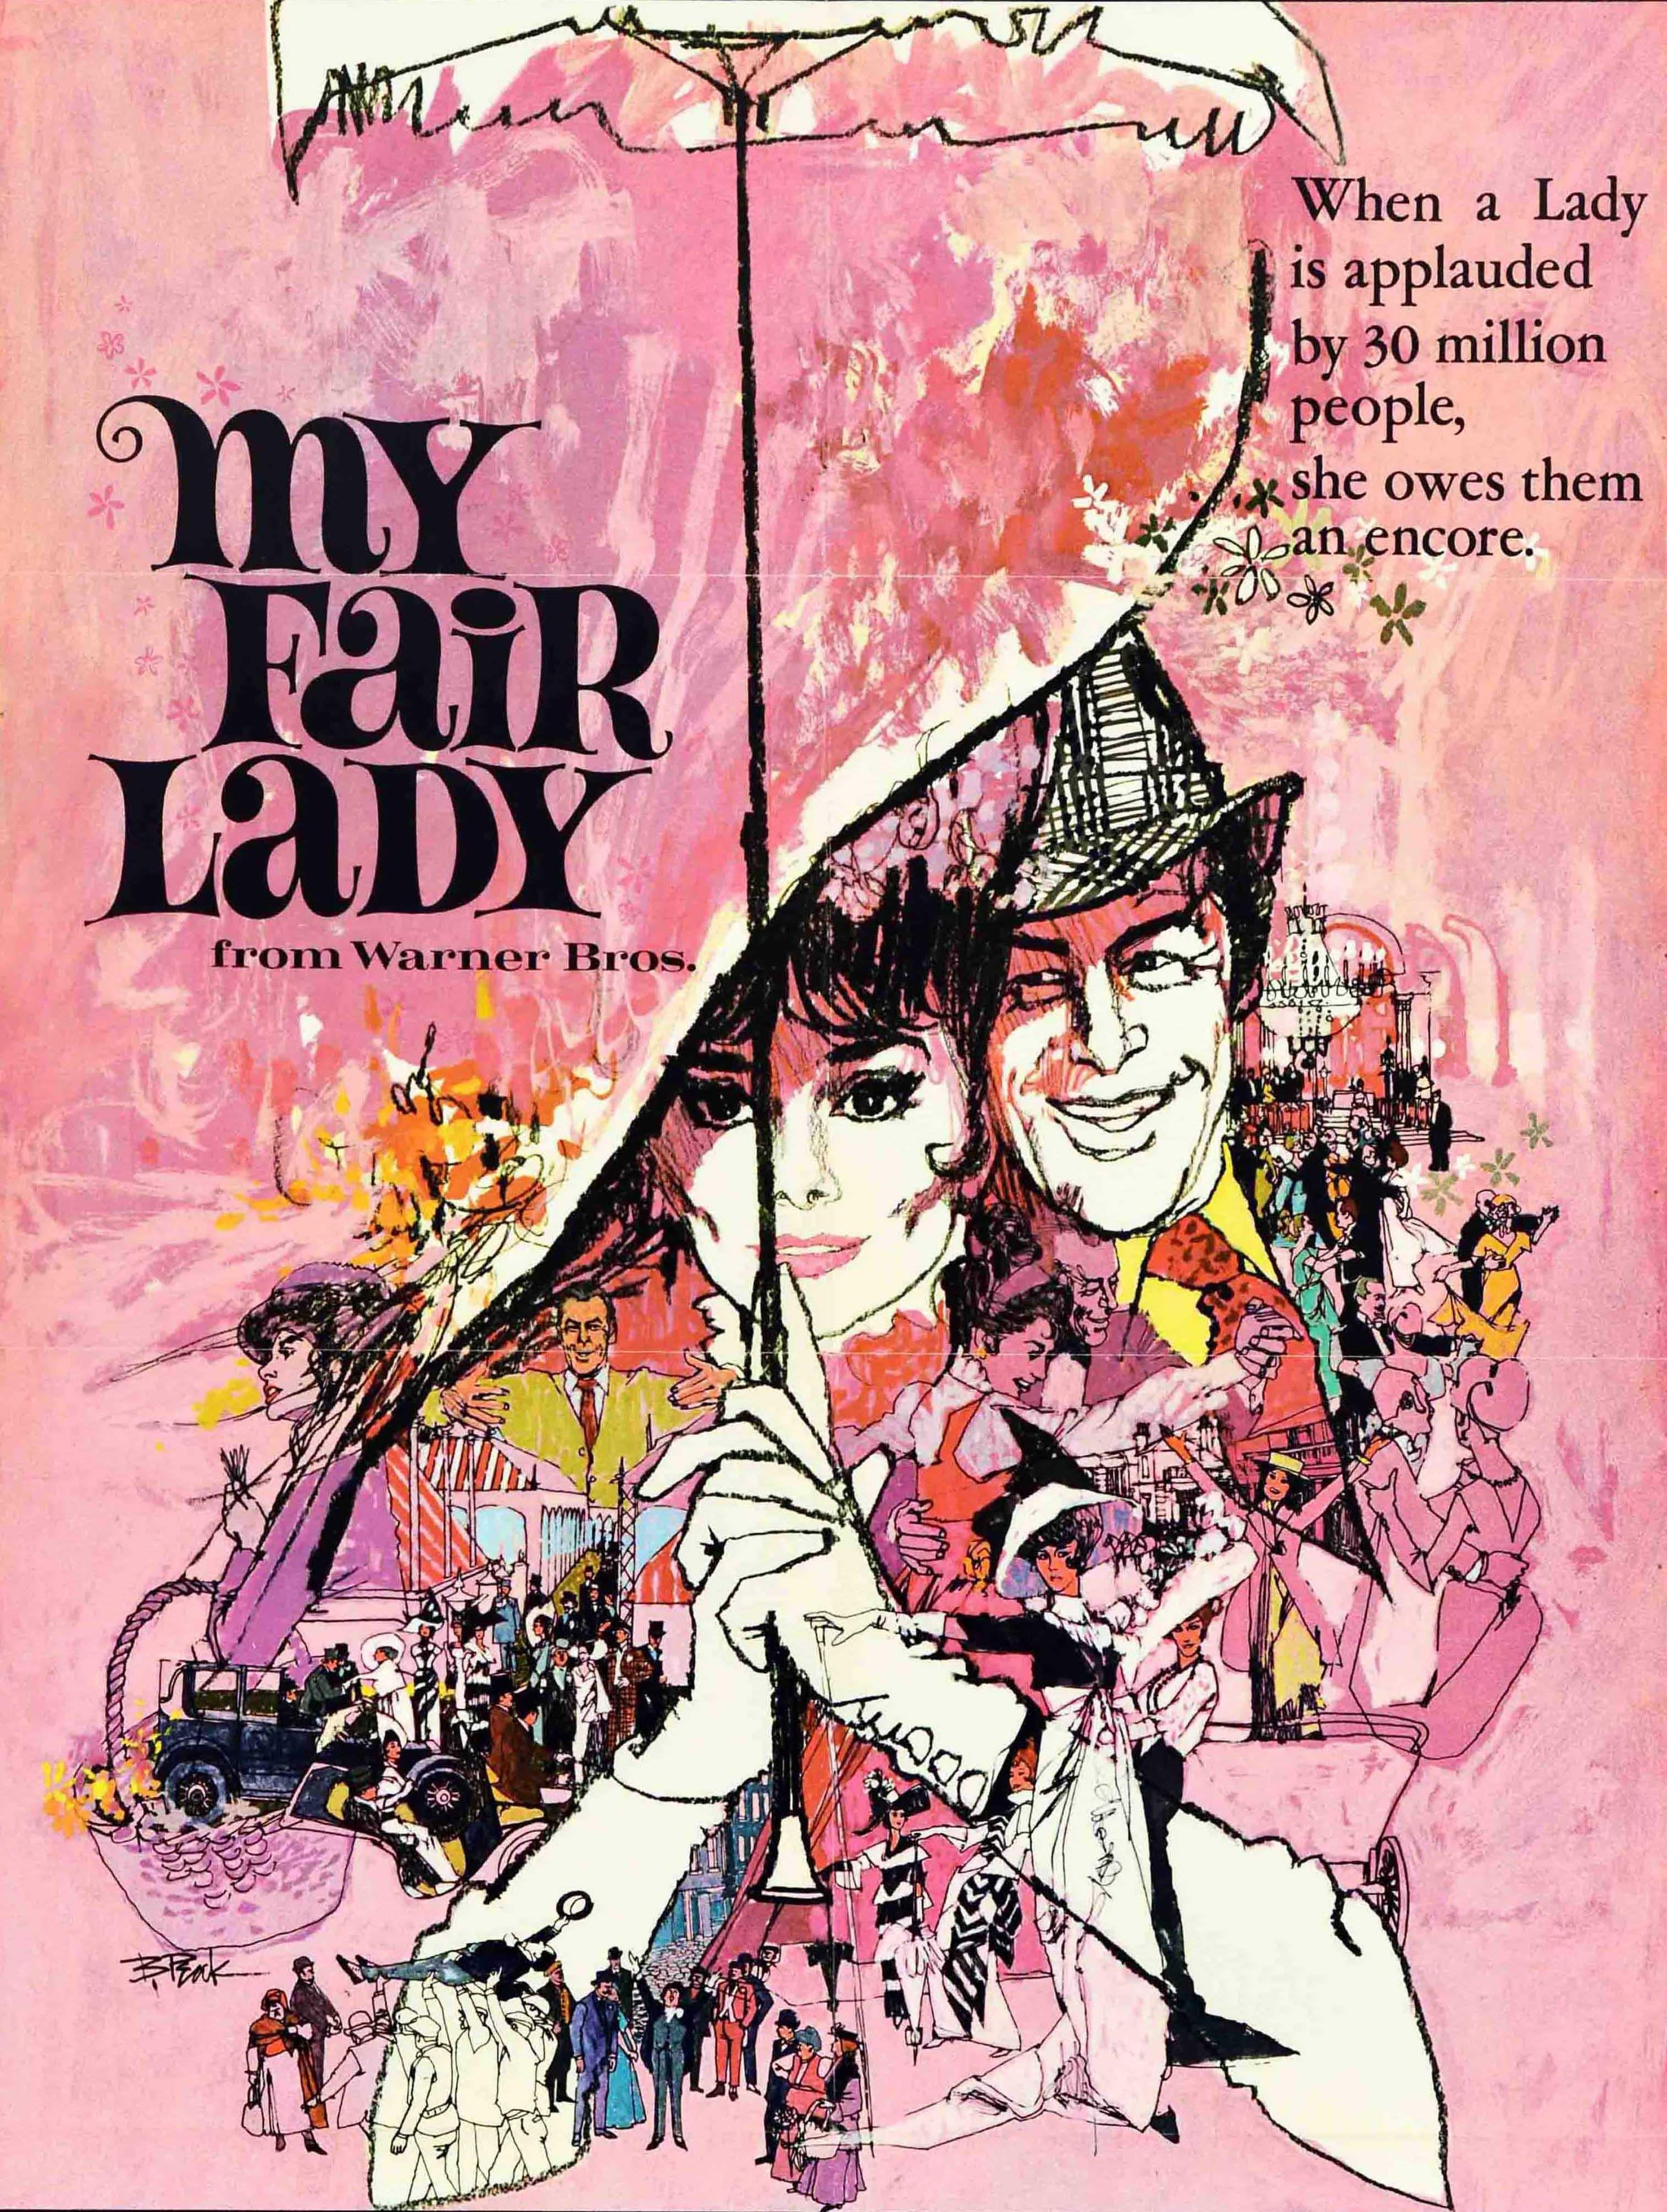 Original vintage movie poster for the re-release of the 1964 classic musical comedy film My Fair Lady 